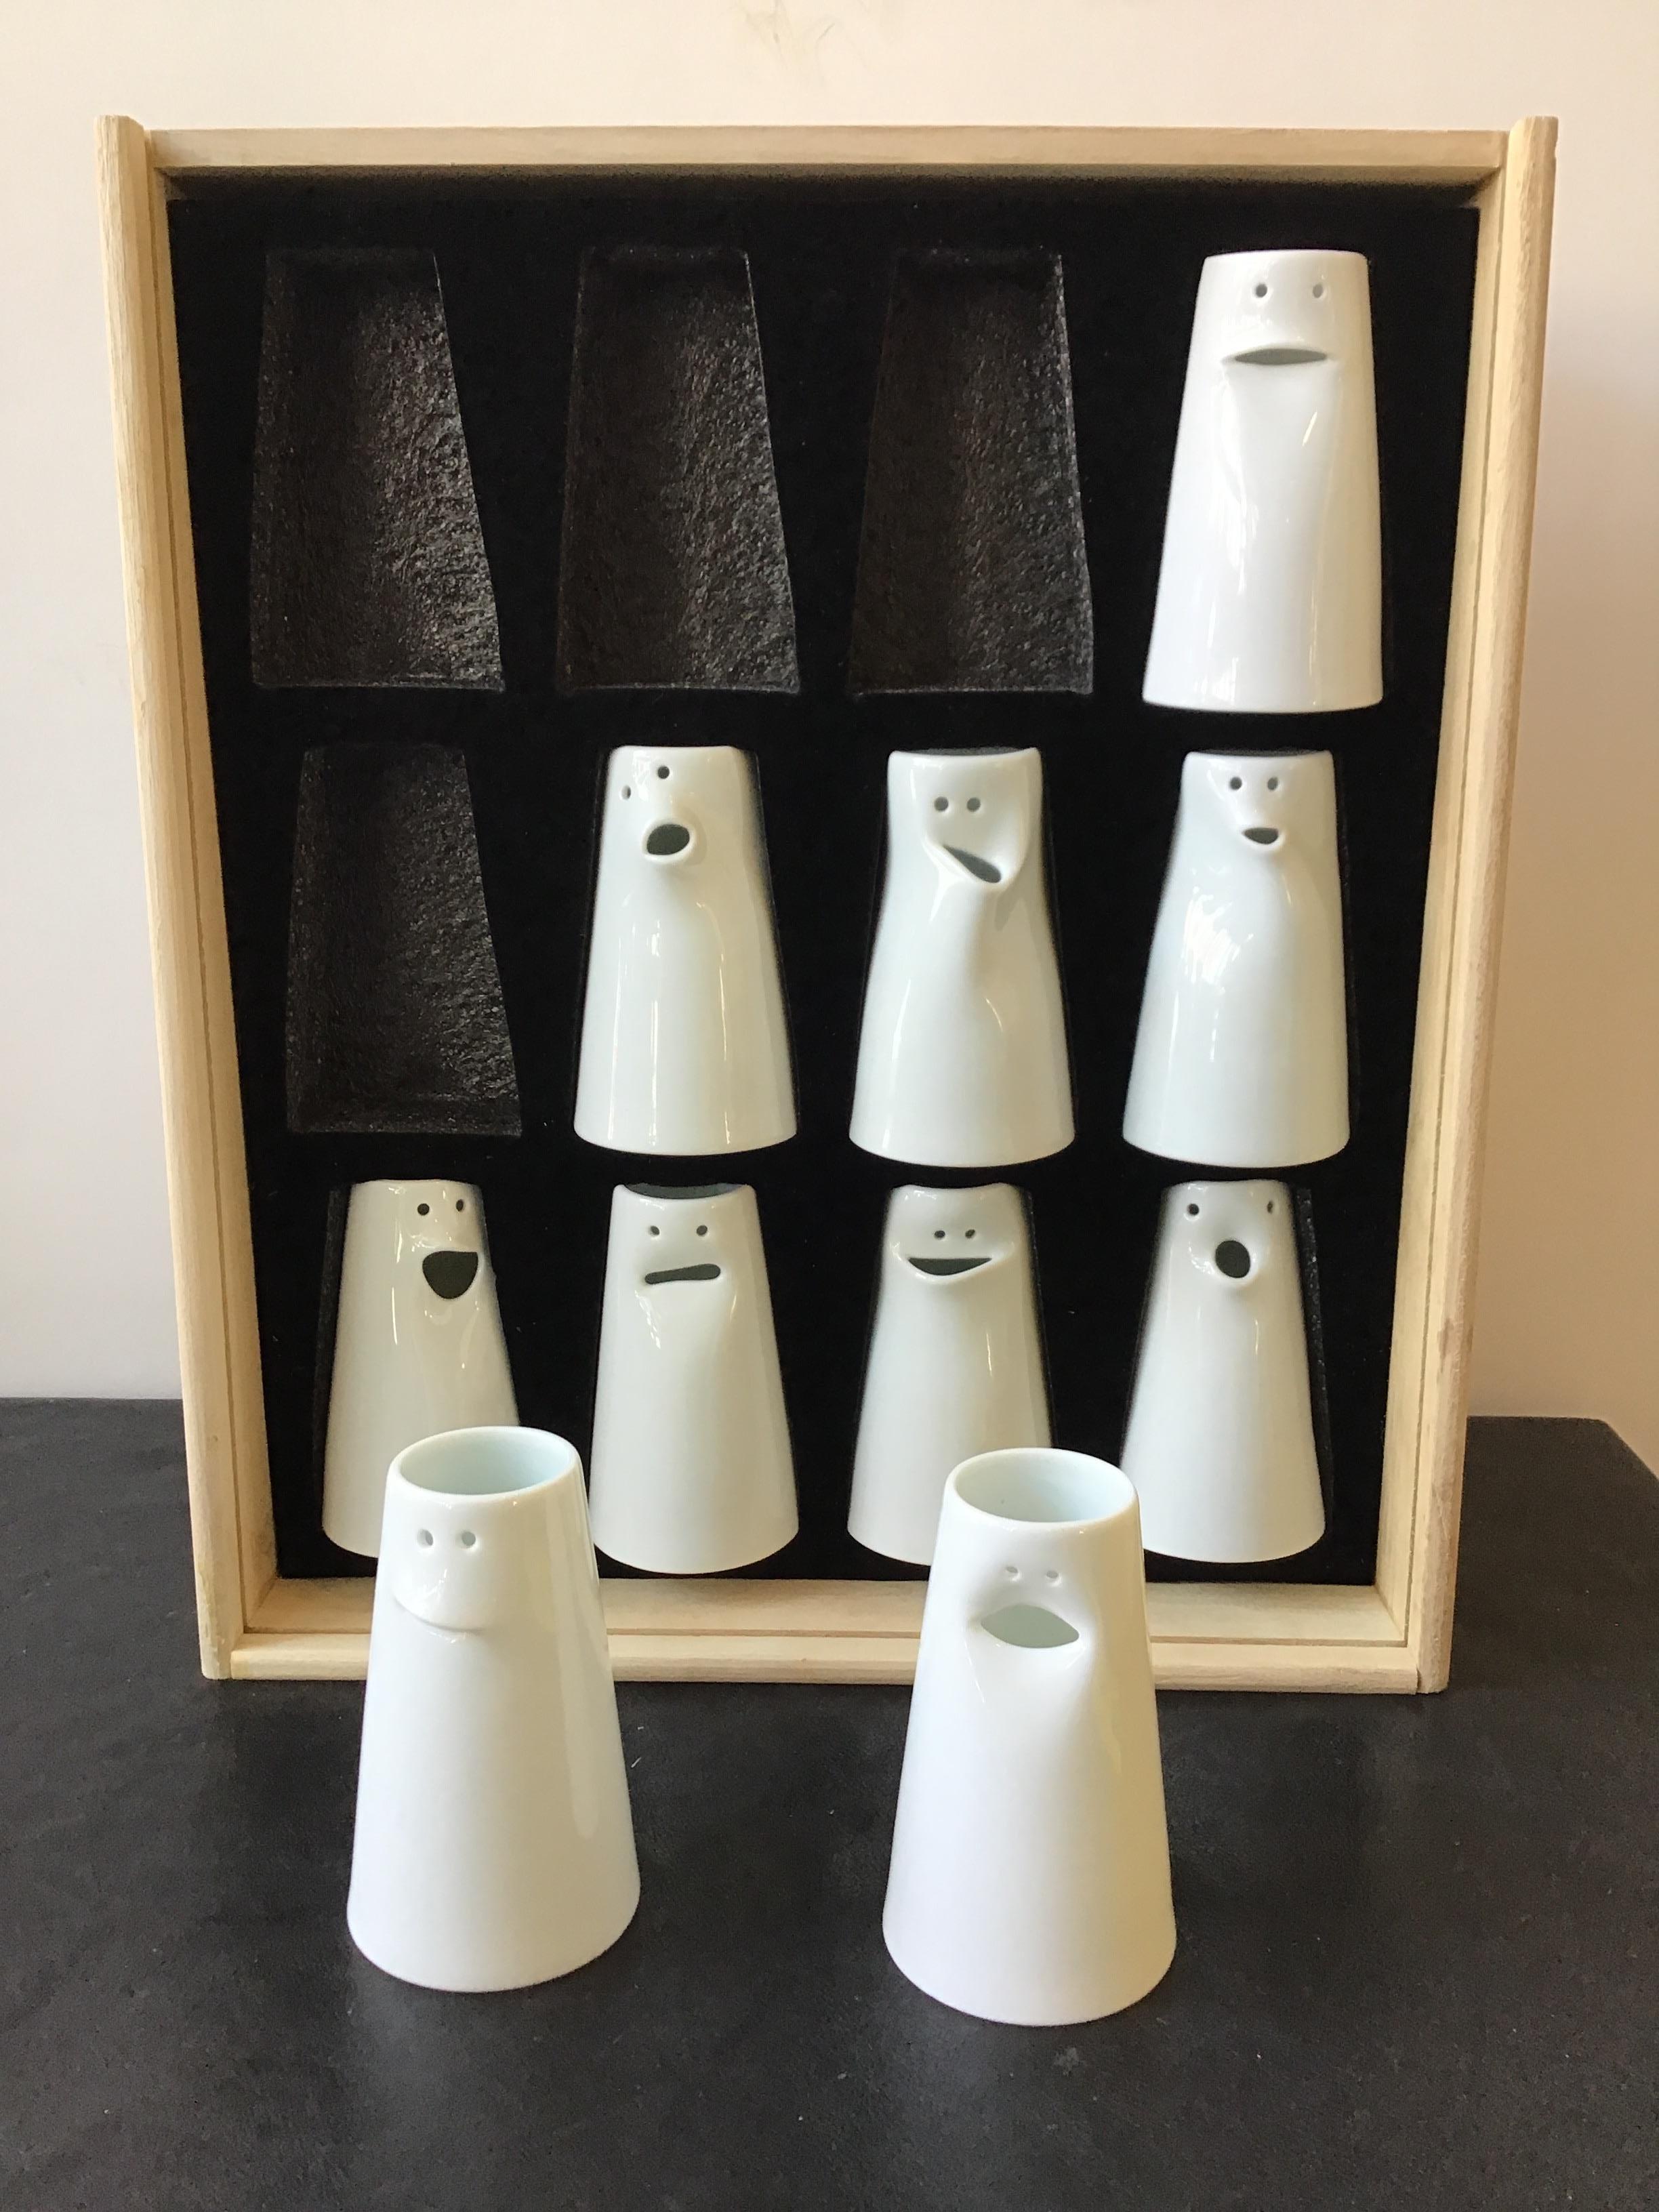 Spin ceramics fine porcelain face bud vases, designed by Tong Wei. Made by Jingdezhen. Some vases can also be used as creamers. Each face is different. Set of 10.